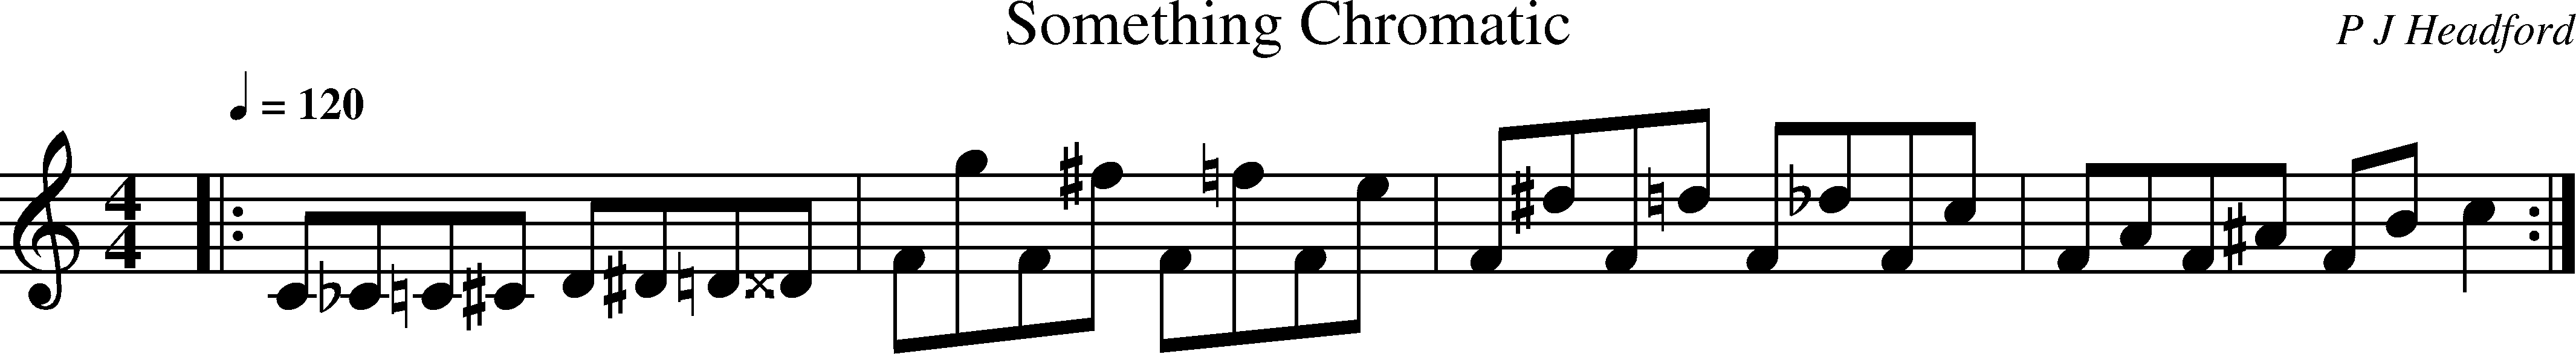 A sample of a chromatic tune